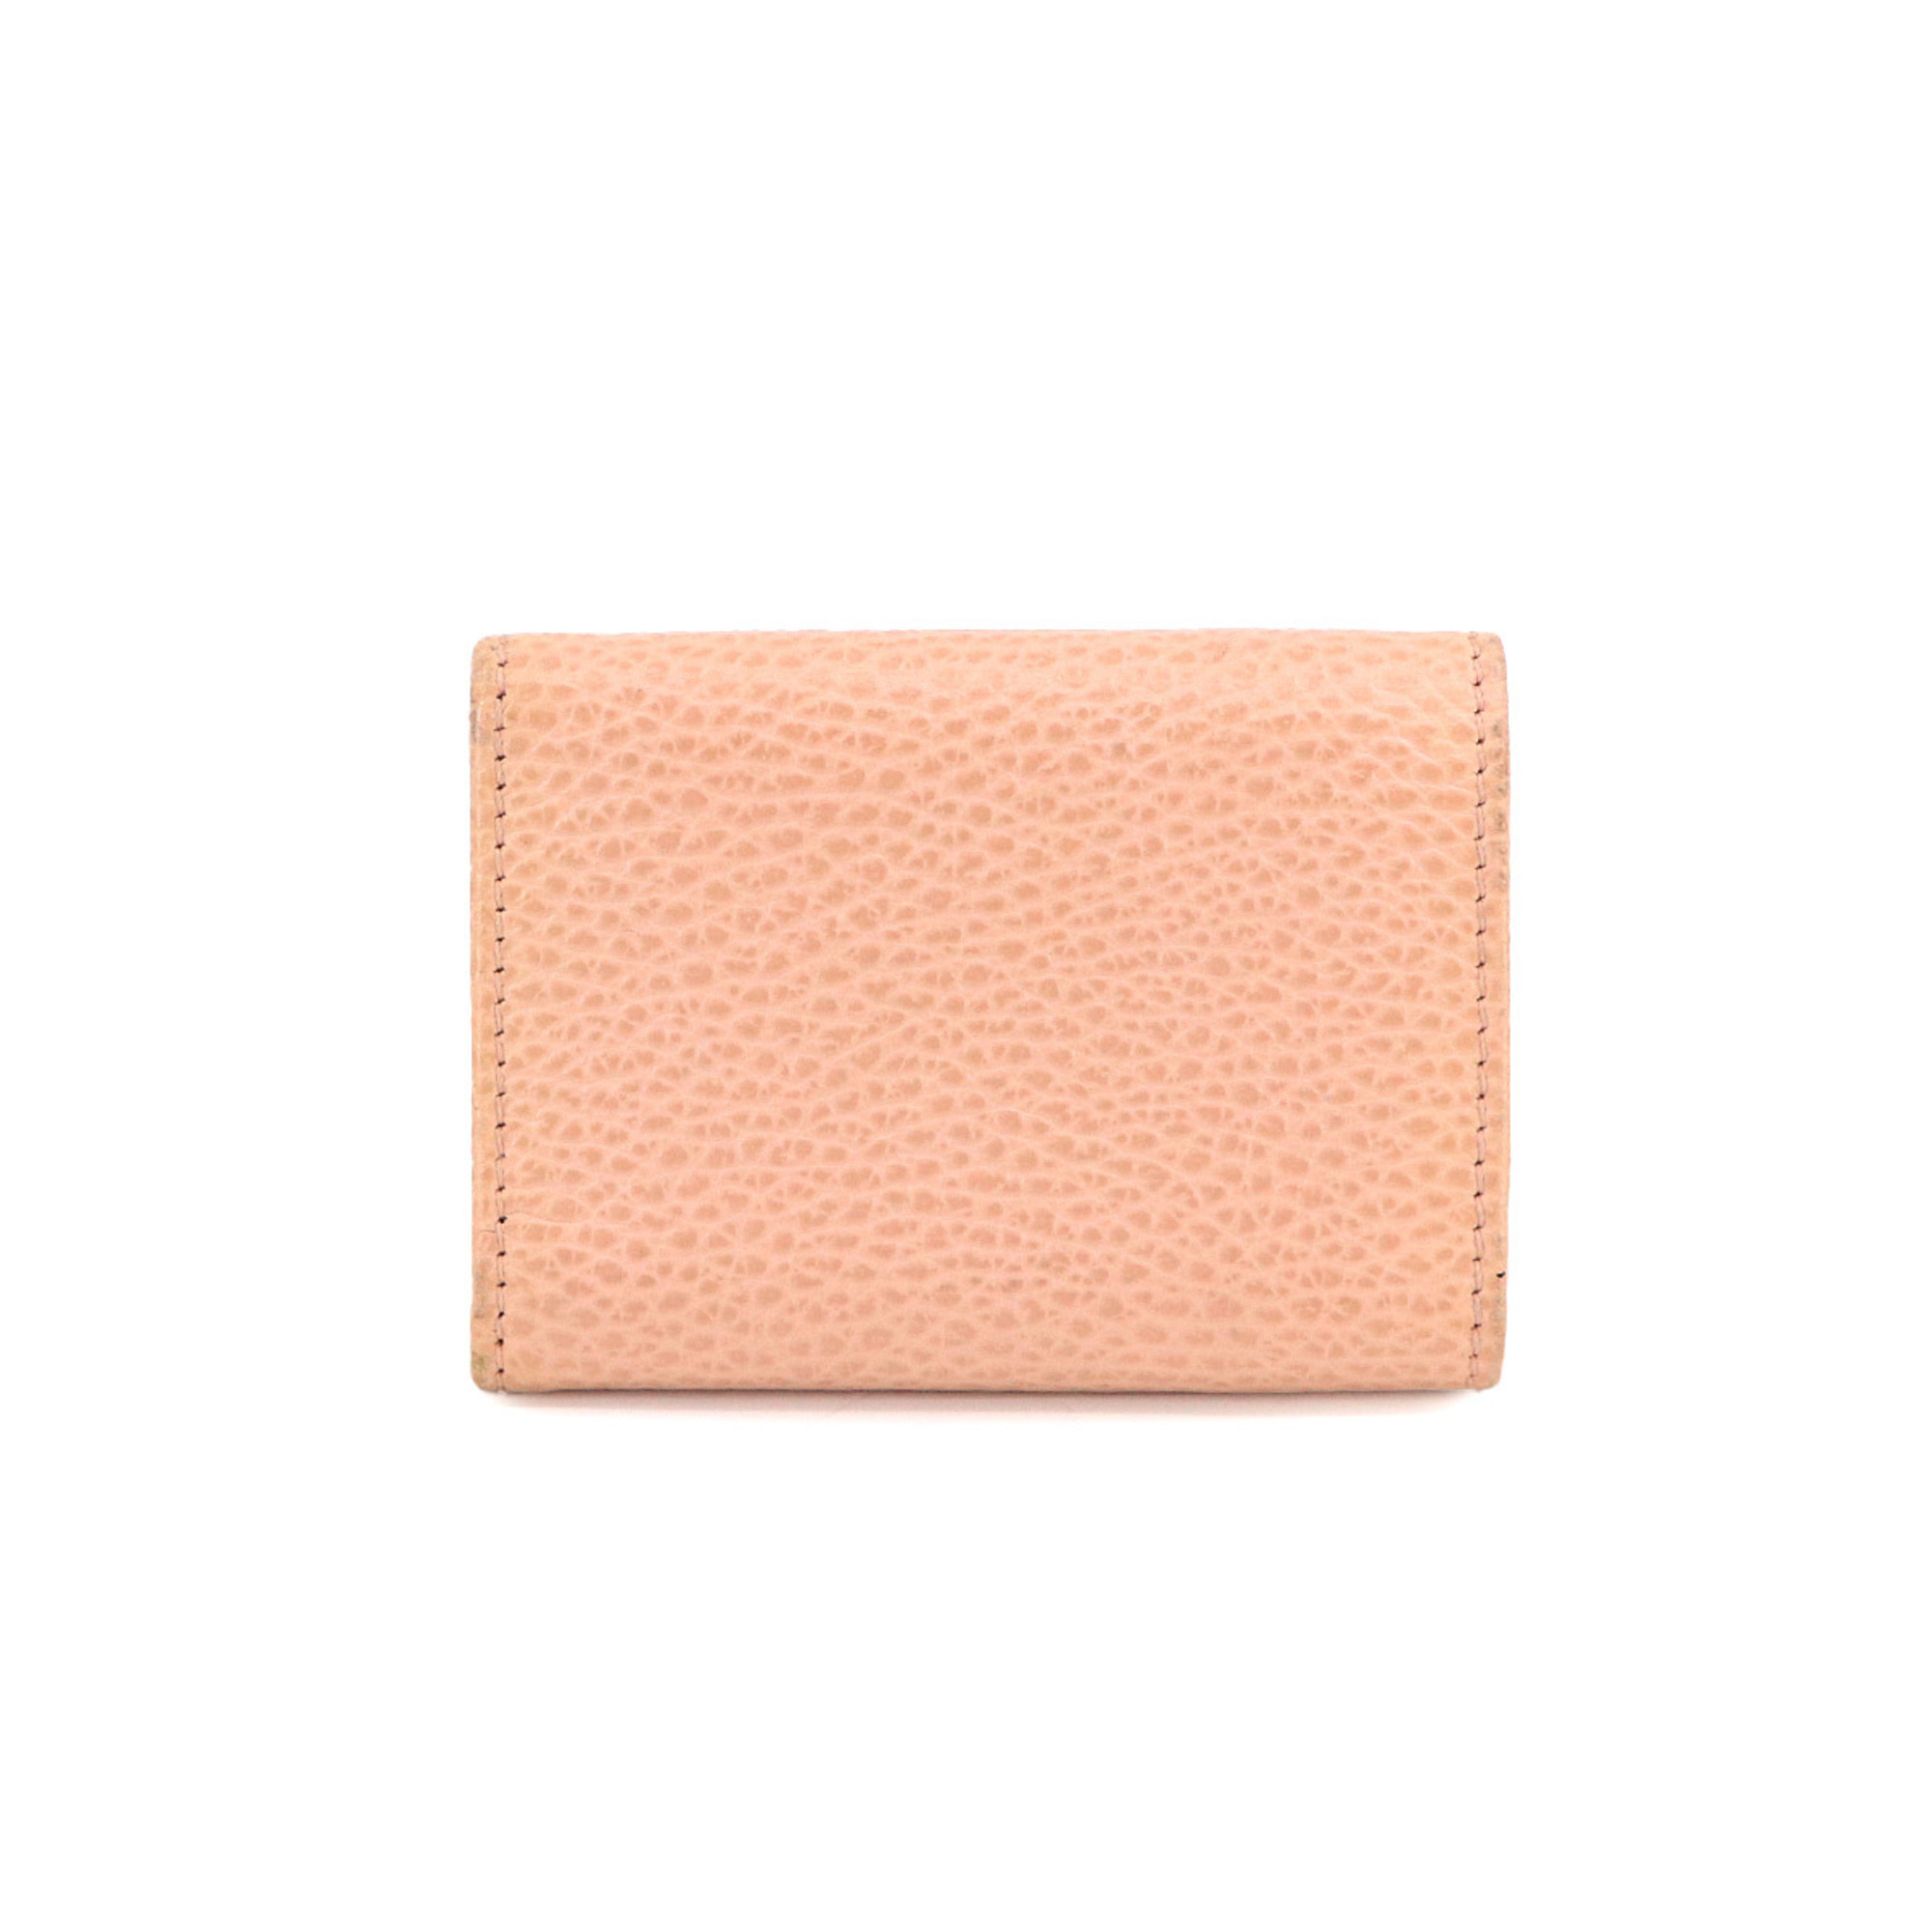 GUCCI GG Marmont Double G Wallet Tri-fold Leather Pink 735212 Compact